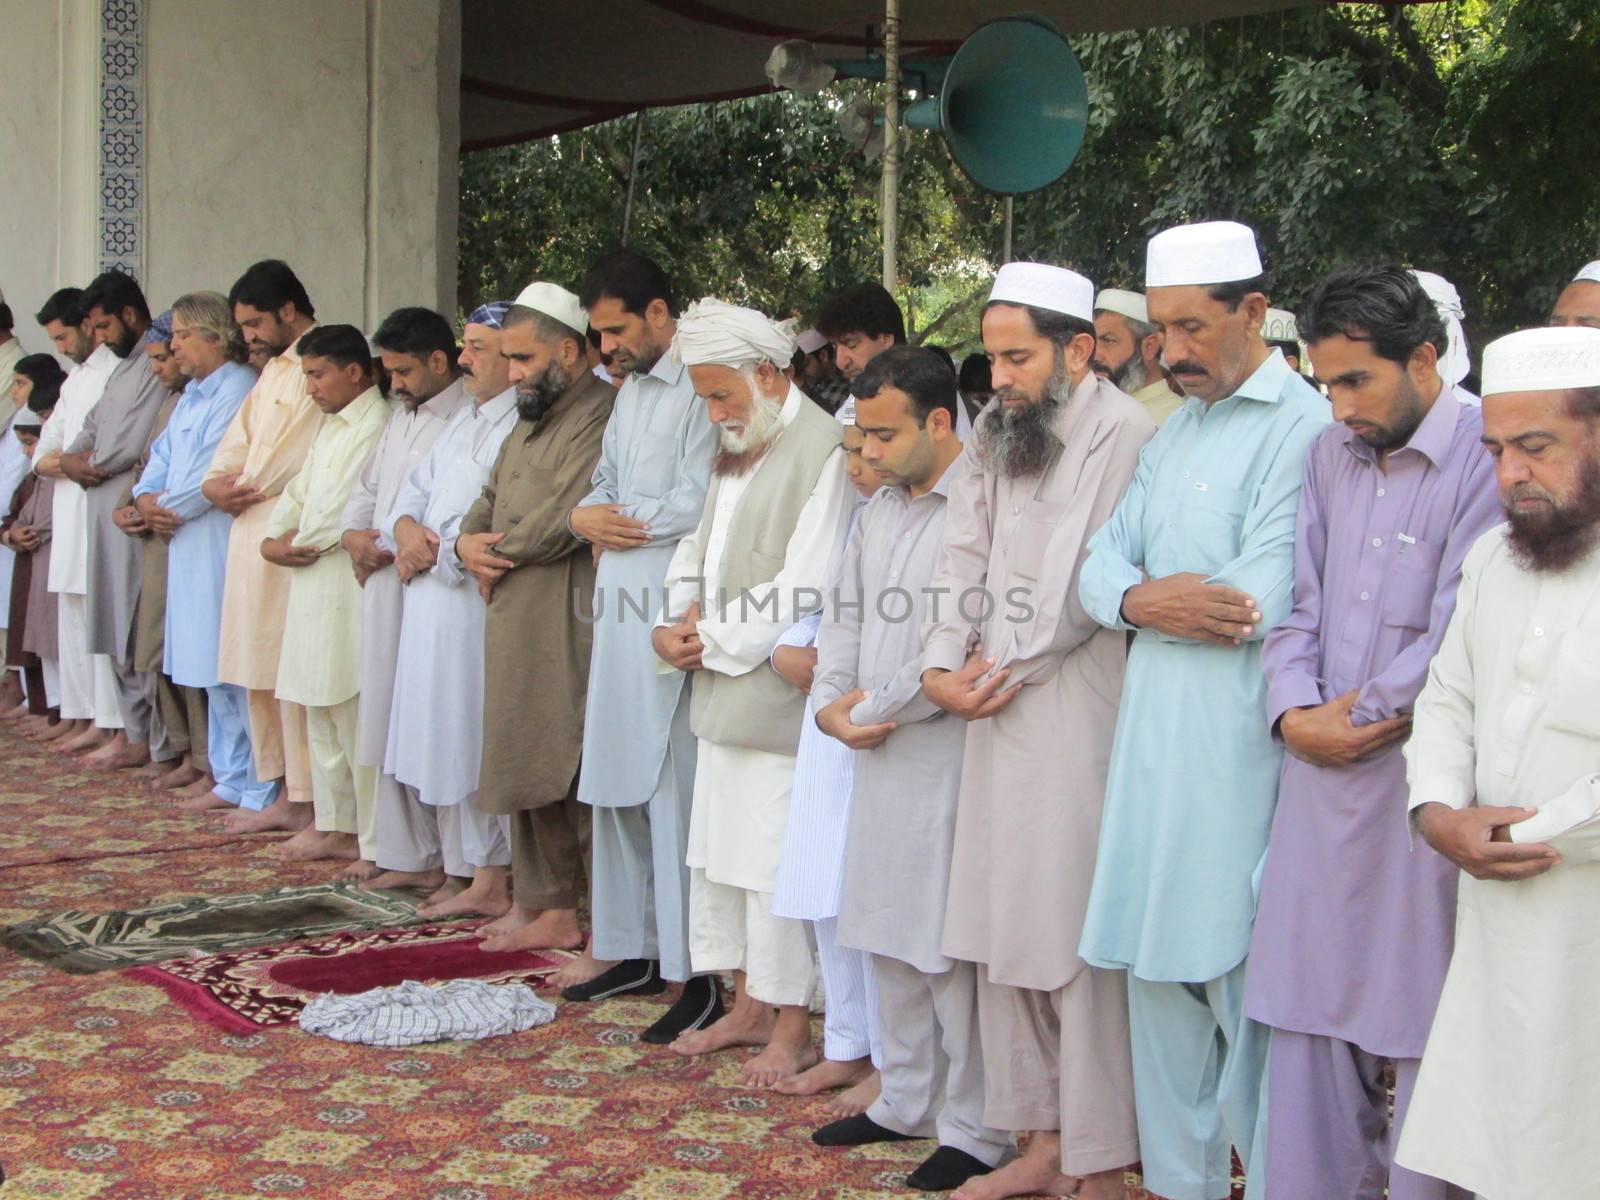 PAKISTAN, Peshawar: Muslims celebrate Eid-al-Adha by offering prayers at a mosque in Peshawar, Pakistan on September 25, 2015. The festival marks the end of Hajj, which is a holy pilgrimage that many Muslims make every year.  	